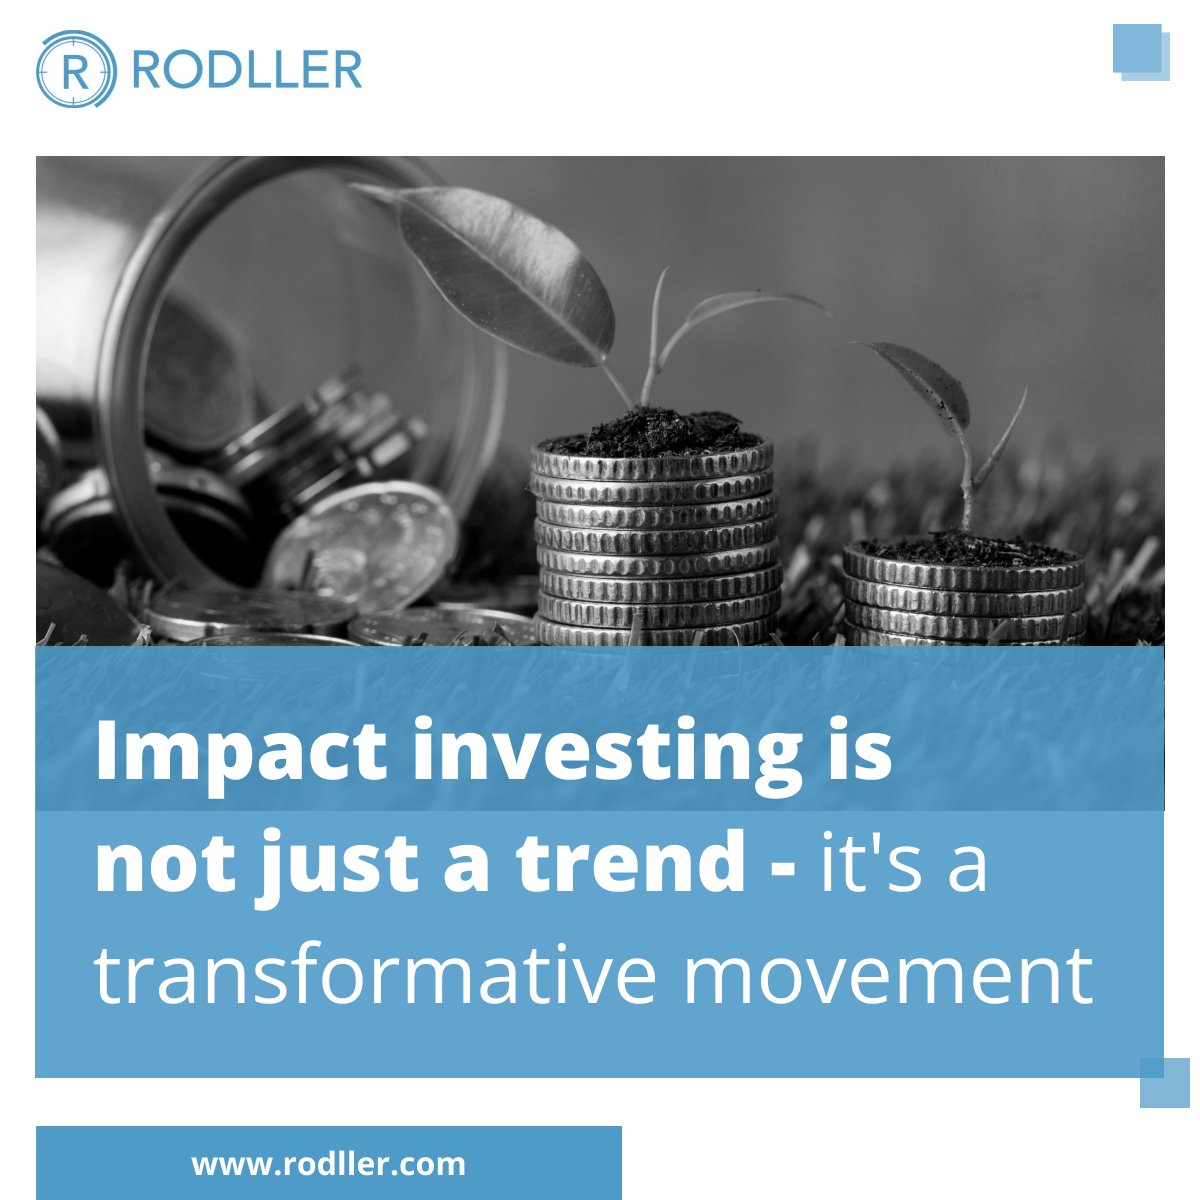 🌟 Impact investing reshapes how we invest for positive change! Gain: 1) Align values with investments 2) Drive meaningful change in areas like environment & social justice 3) Earn solid returns with purpose. Be part of the drive towards sustainable future! 💼

#ImpactInvesting